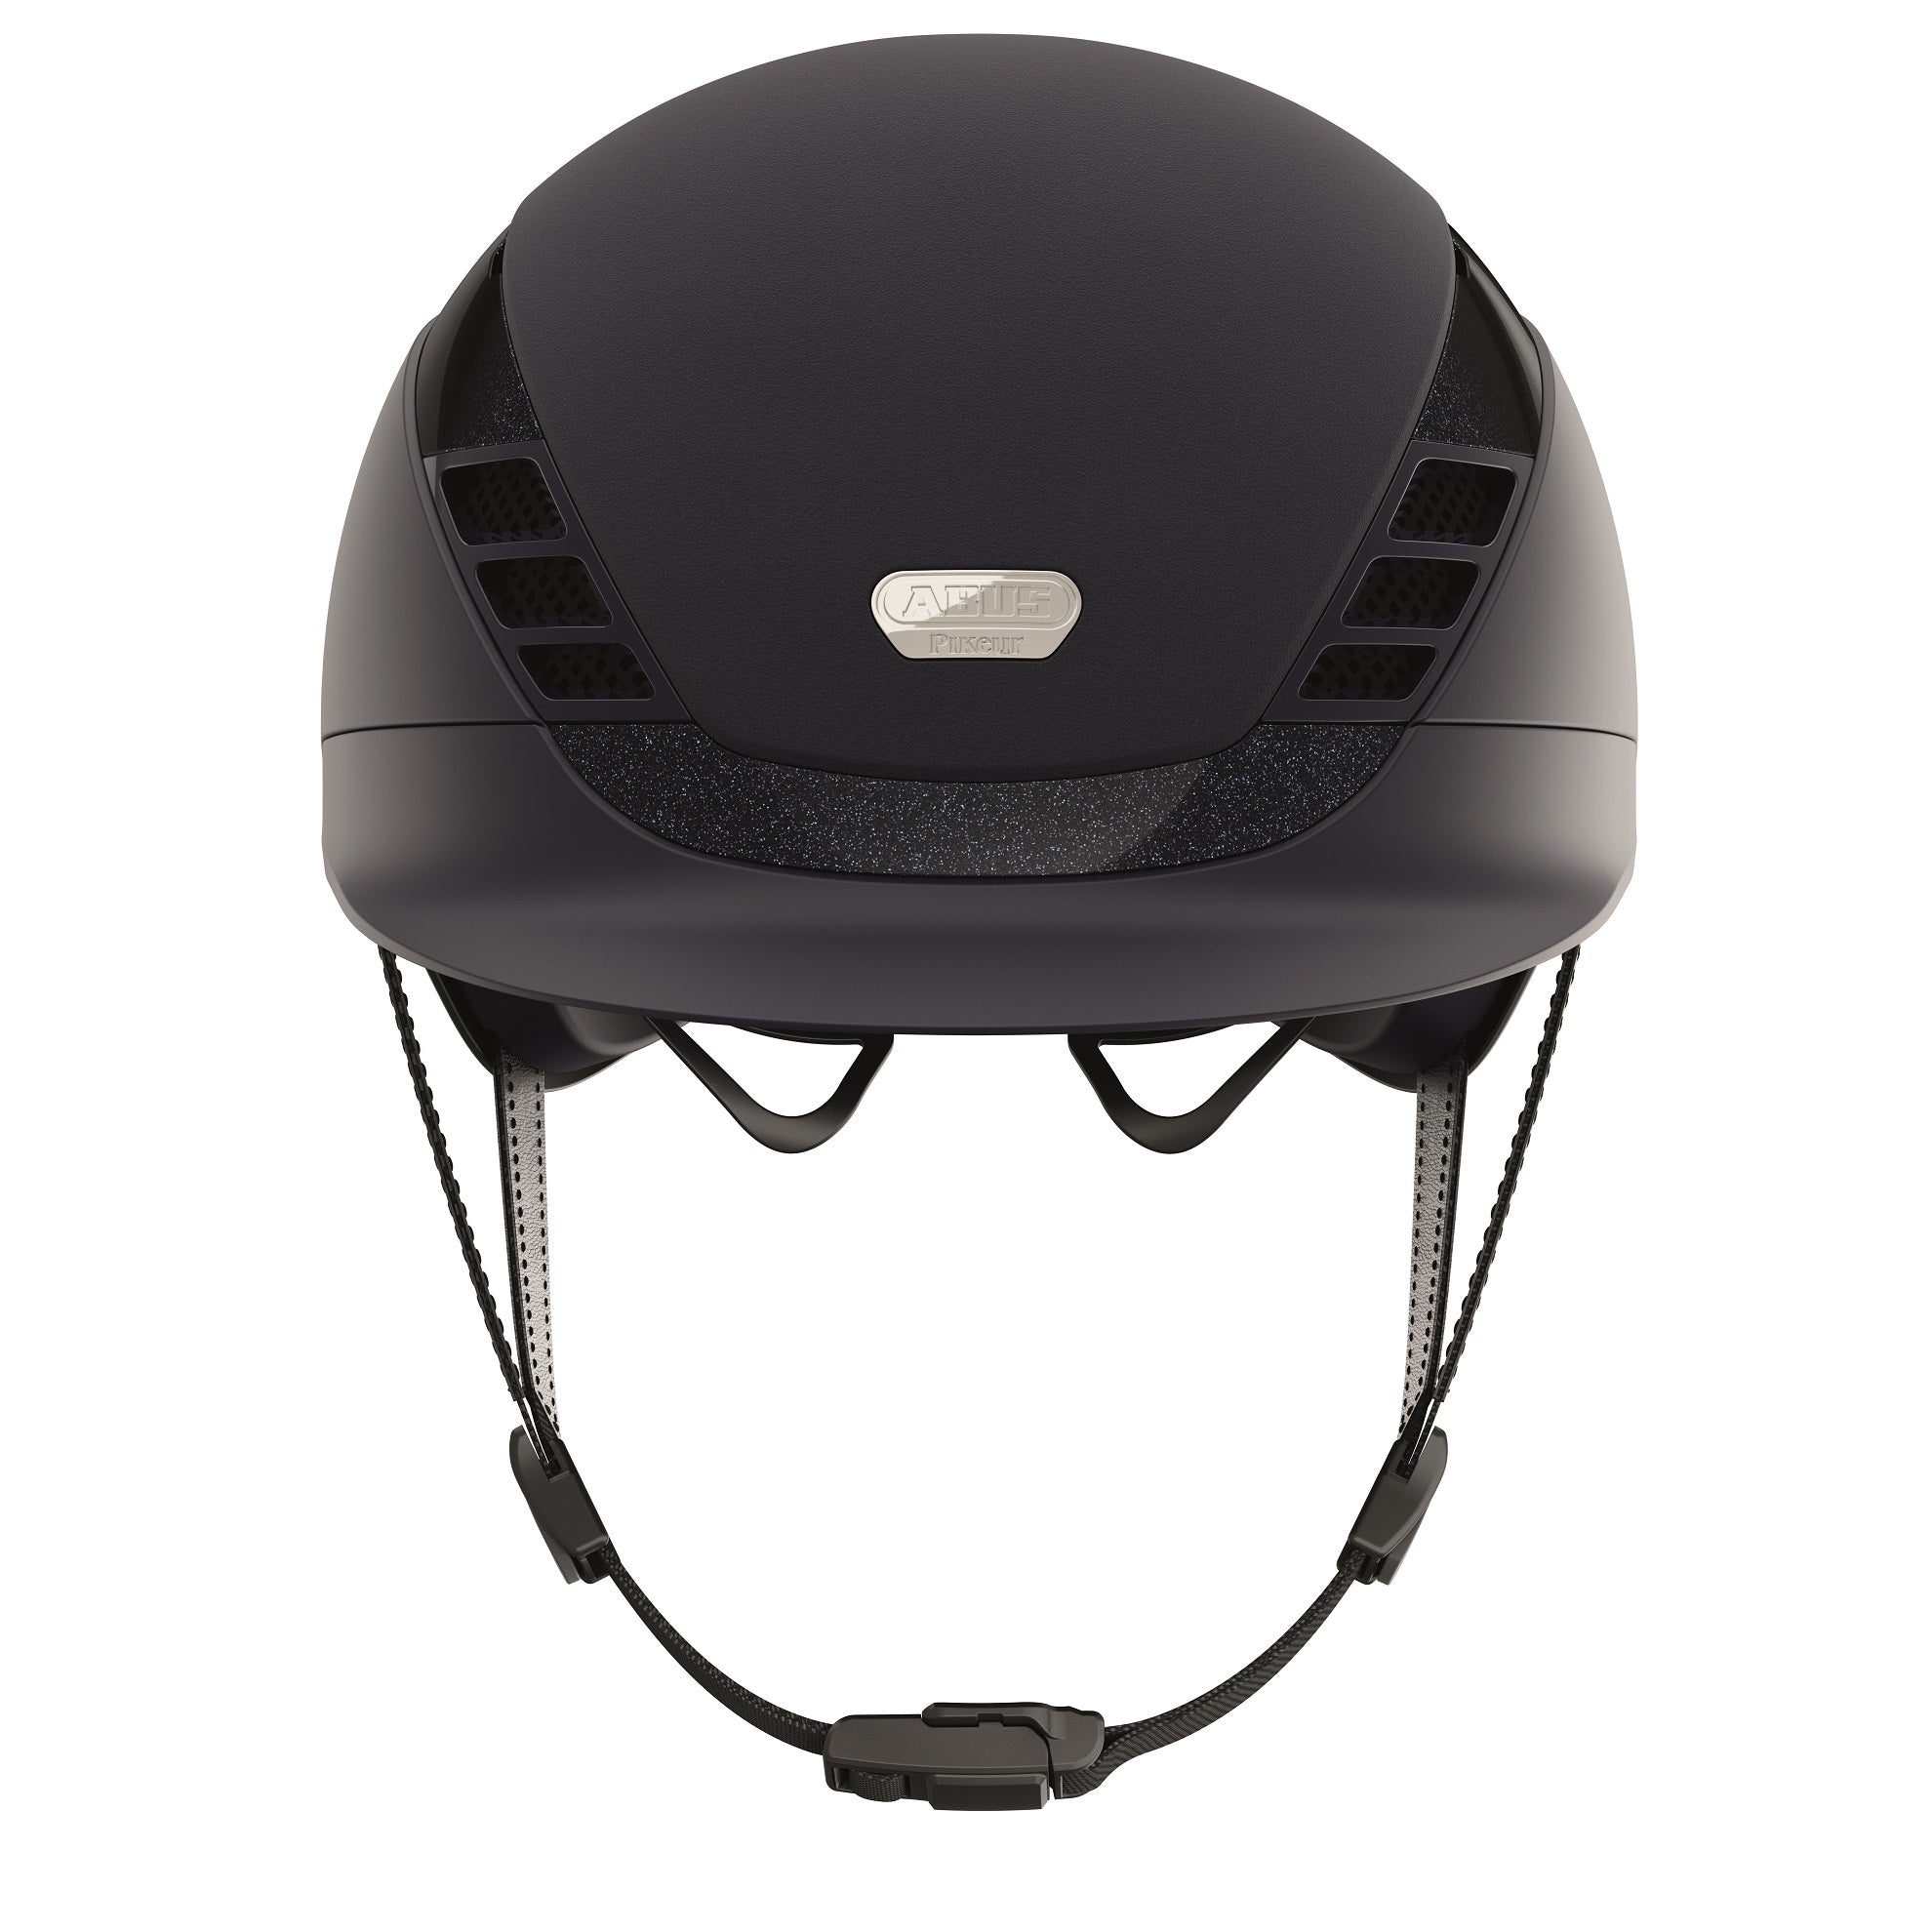 Abus AirLuxe Supreme Riding Helmet - Youth Size